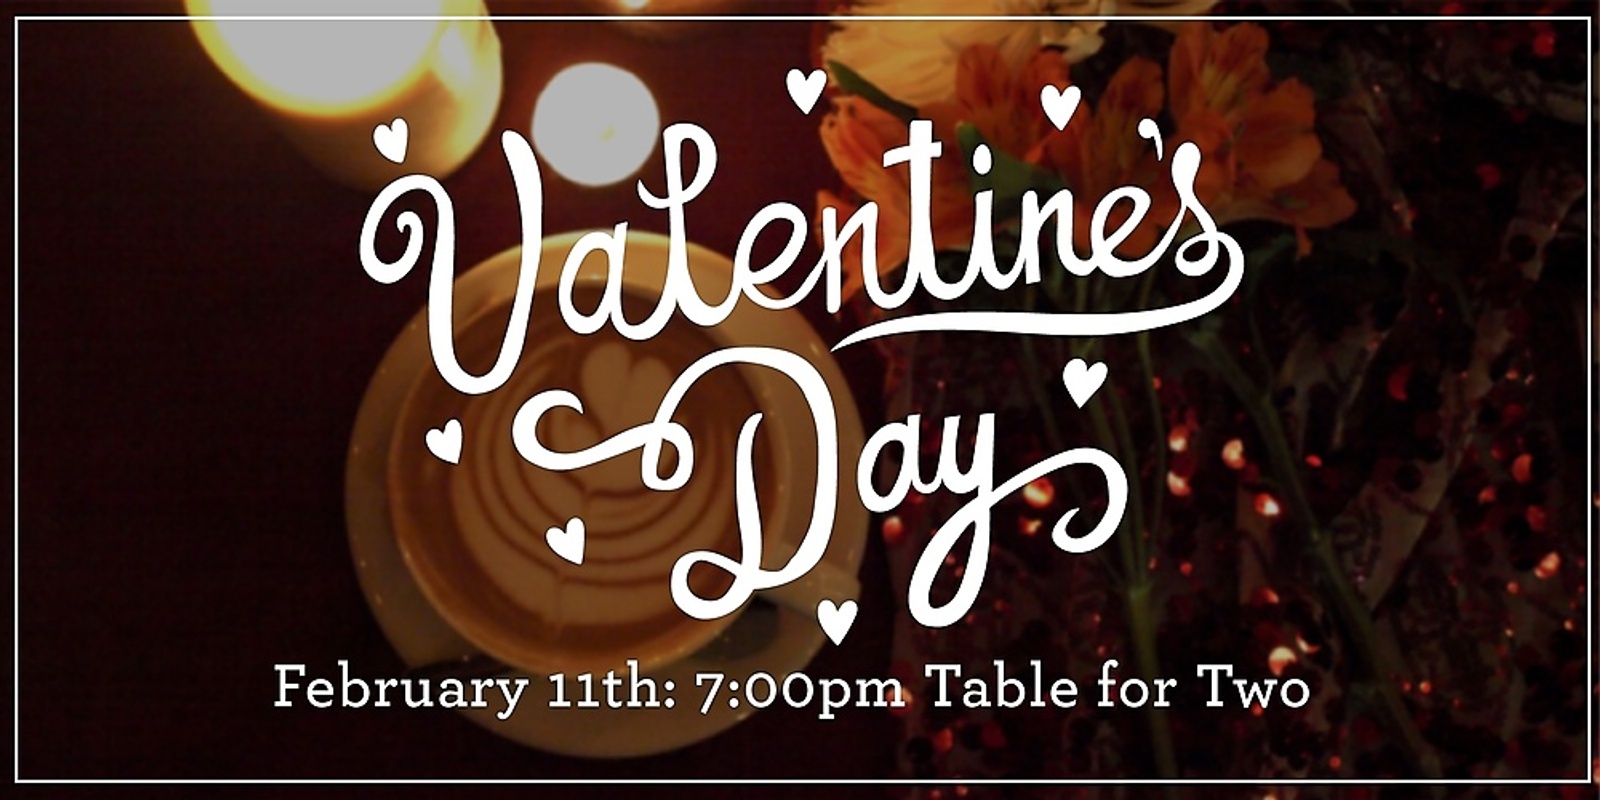 Banner image for Saturday, Feb 11th Valentine's Day Seating 7:00pm 